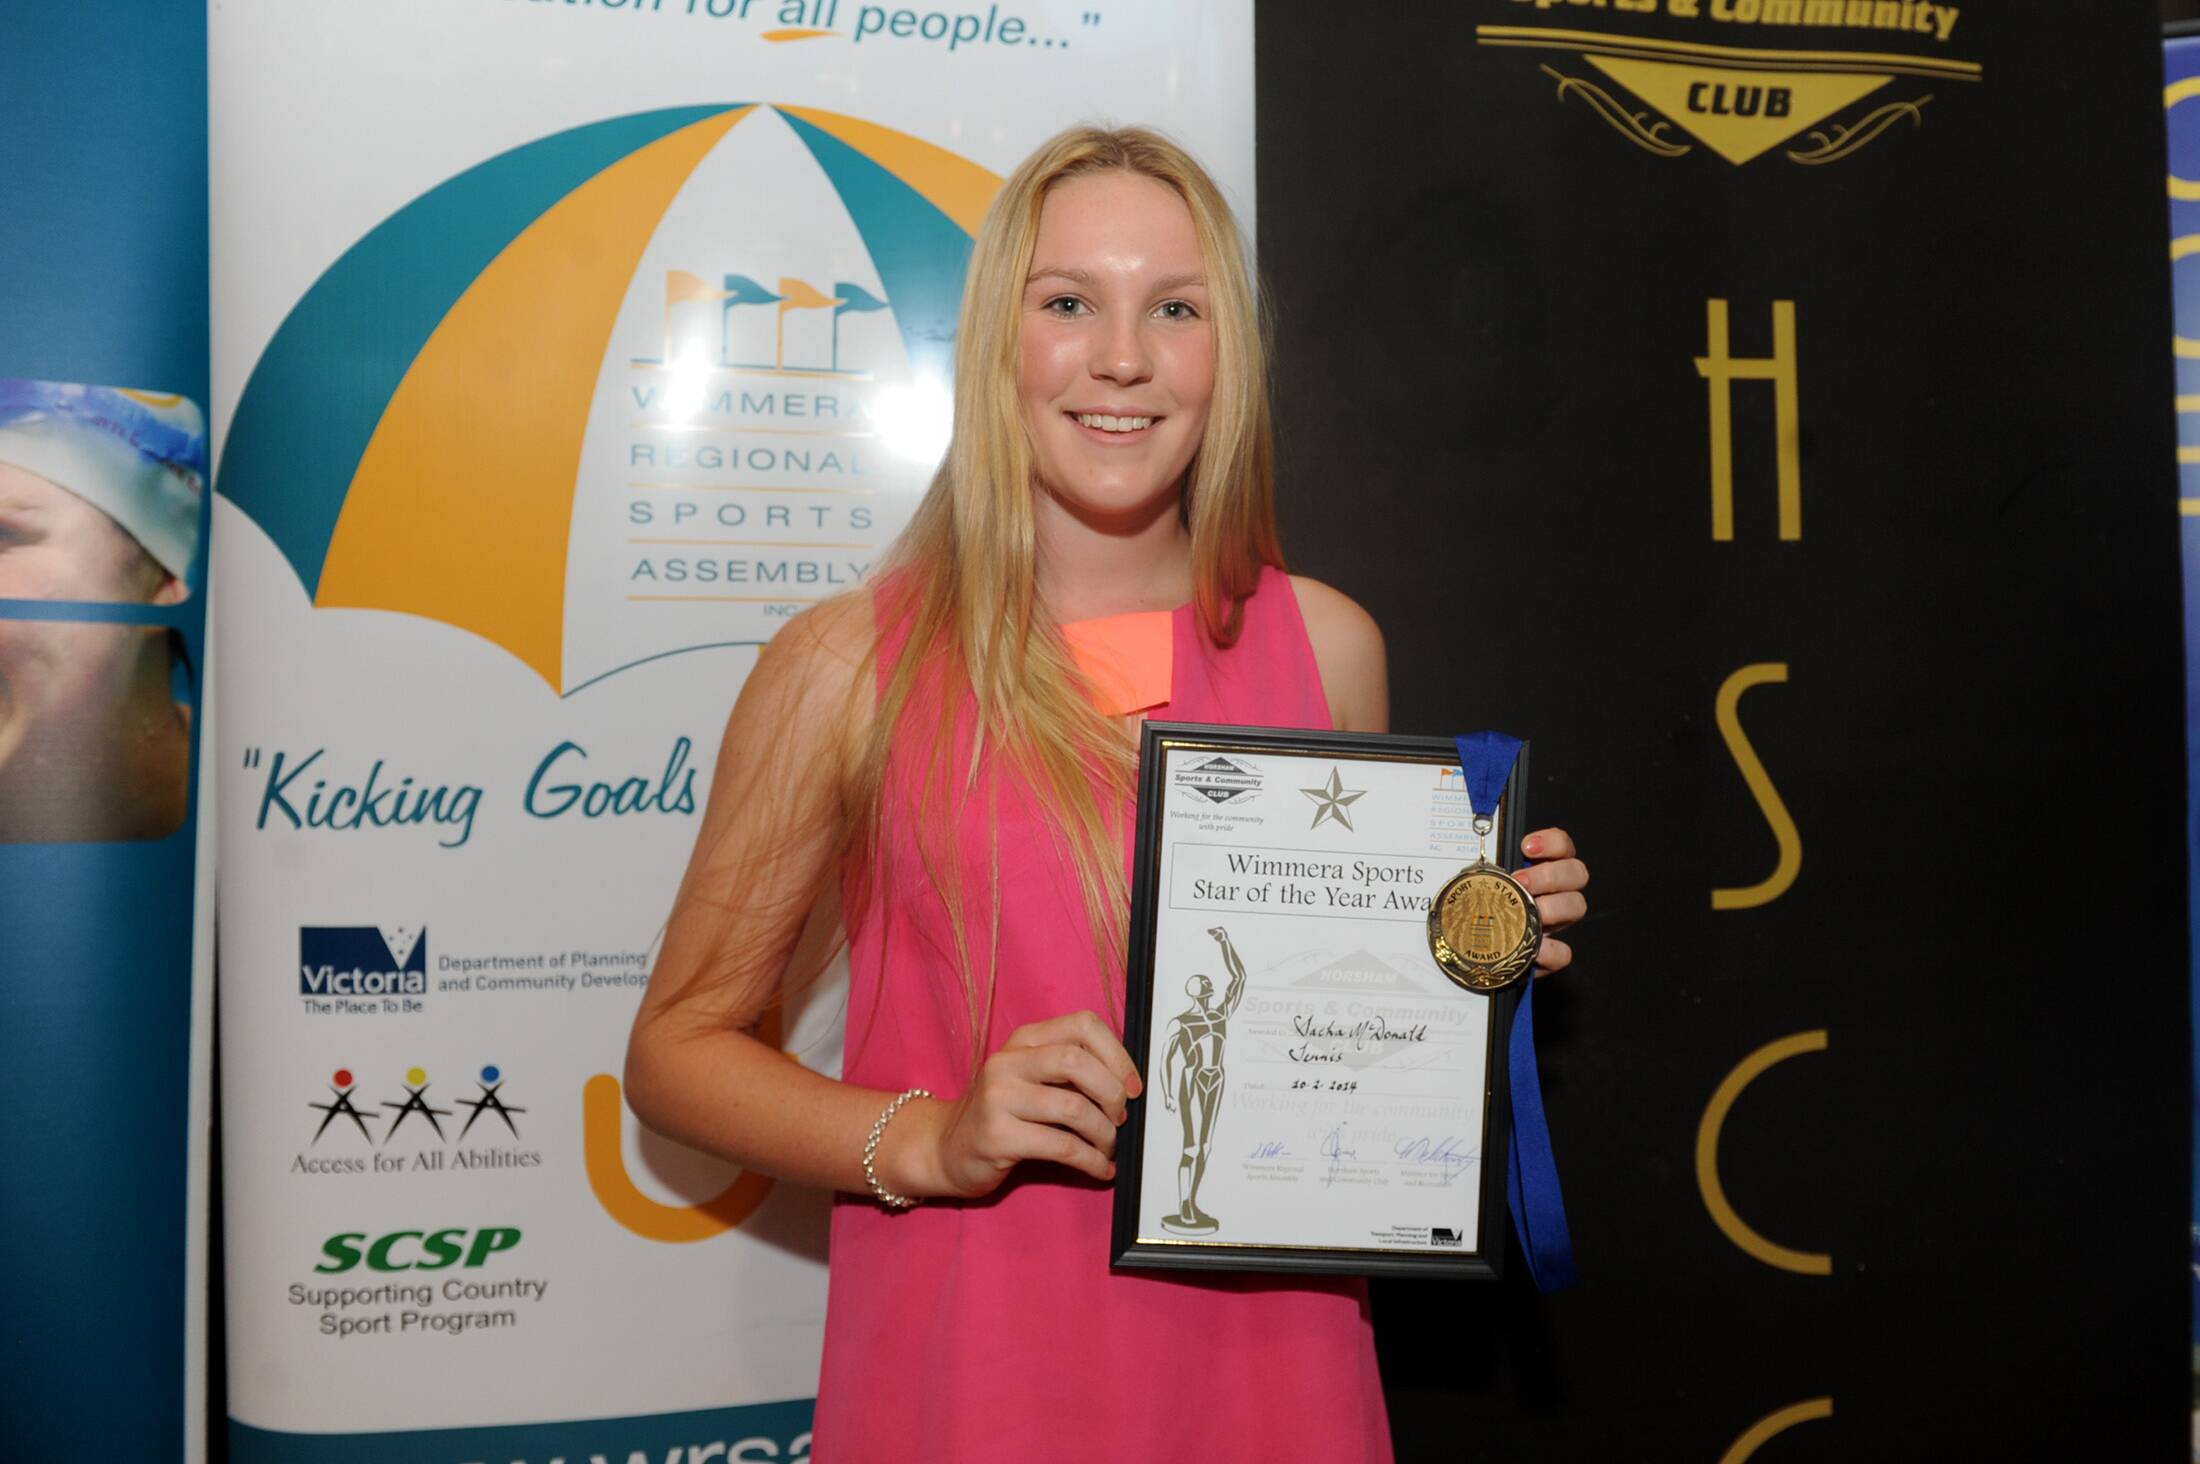 VIDEO, PHOTOS: Darcy Tucker wins Wimmera Sports Star of the Year Award, The Wimmera Mail-Times